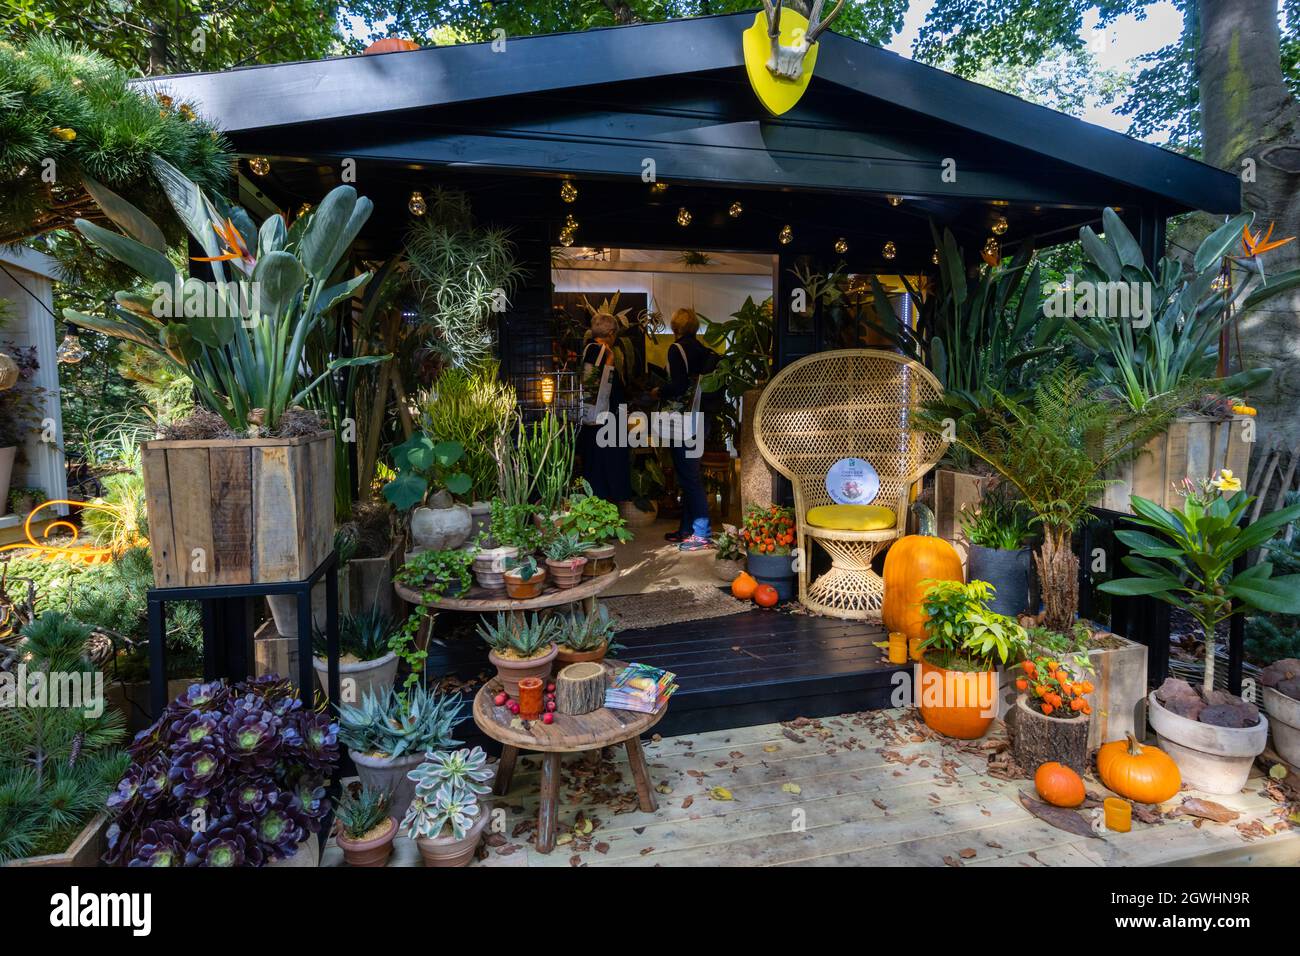 'Celebrate autumn' Best Houseplant Studio at RHS Chelsea Flower Show, held in the grounds of the Royal Hospital Chelsea, London SW3 in September 2021 Stock Photo